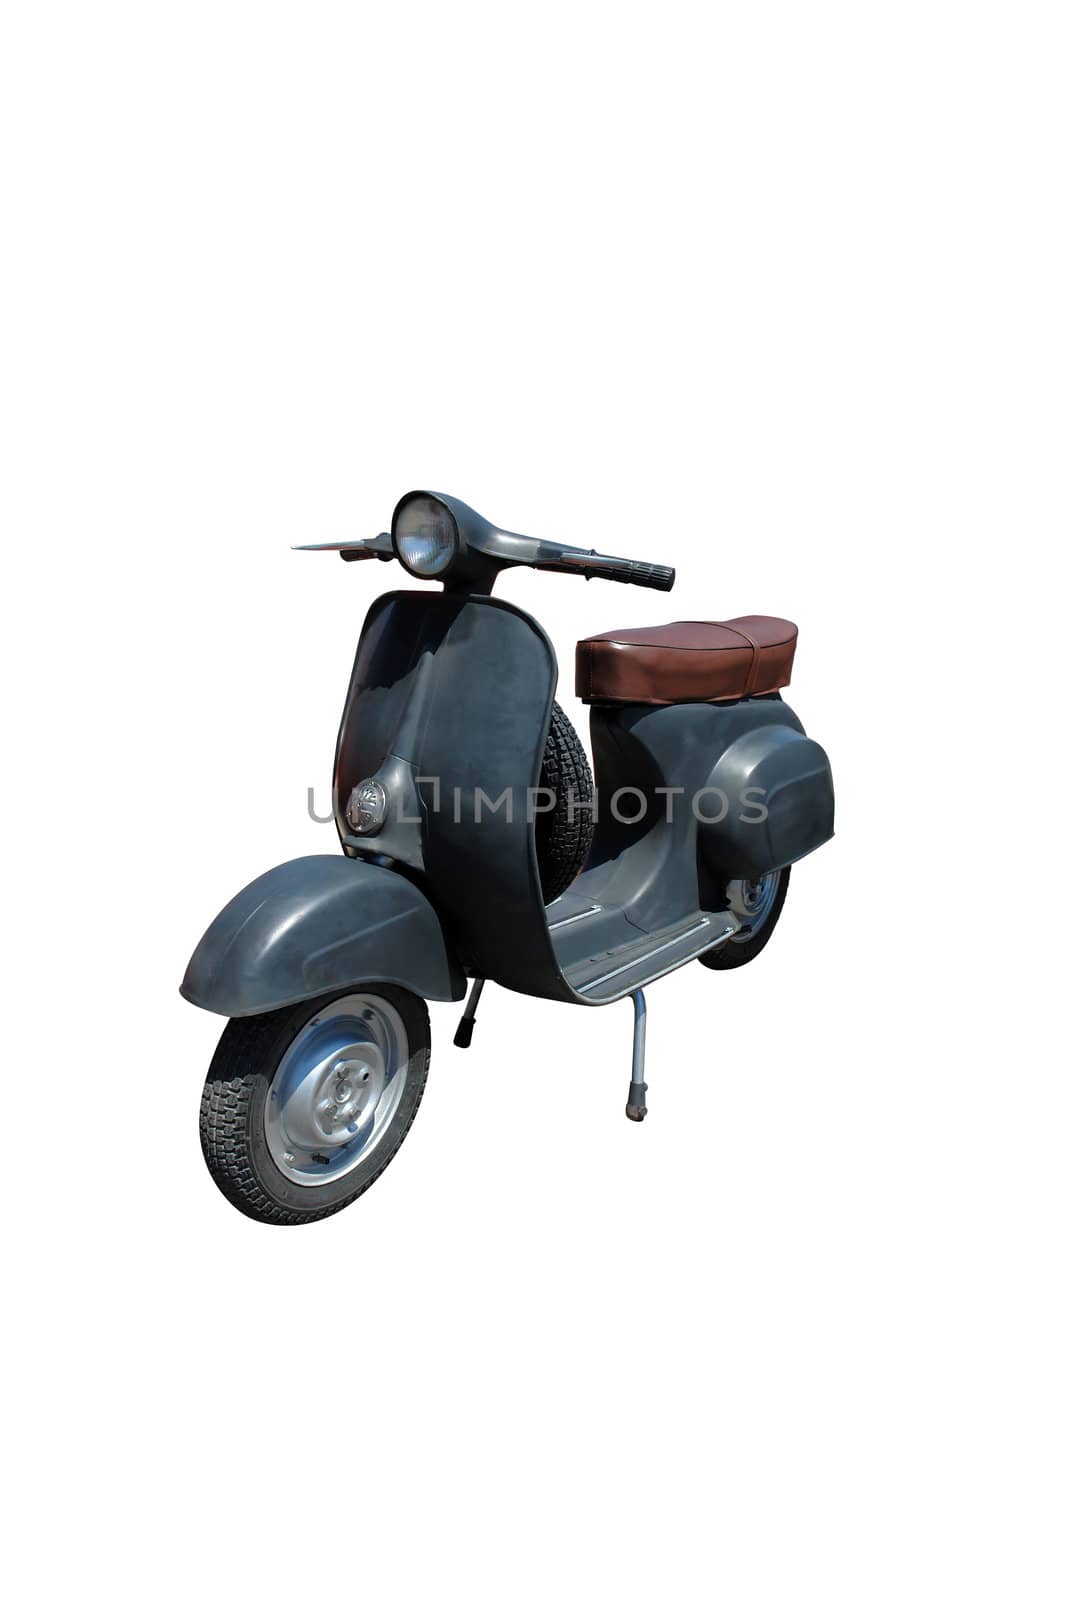 Vintage black scooter (path included) by simas2